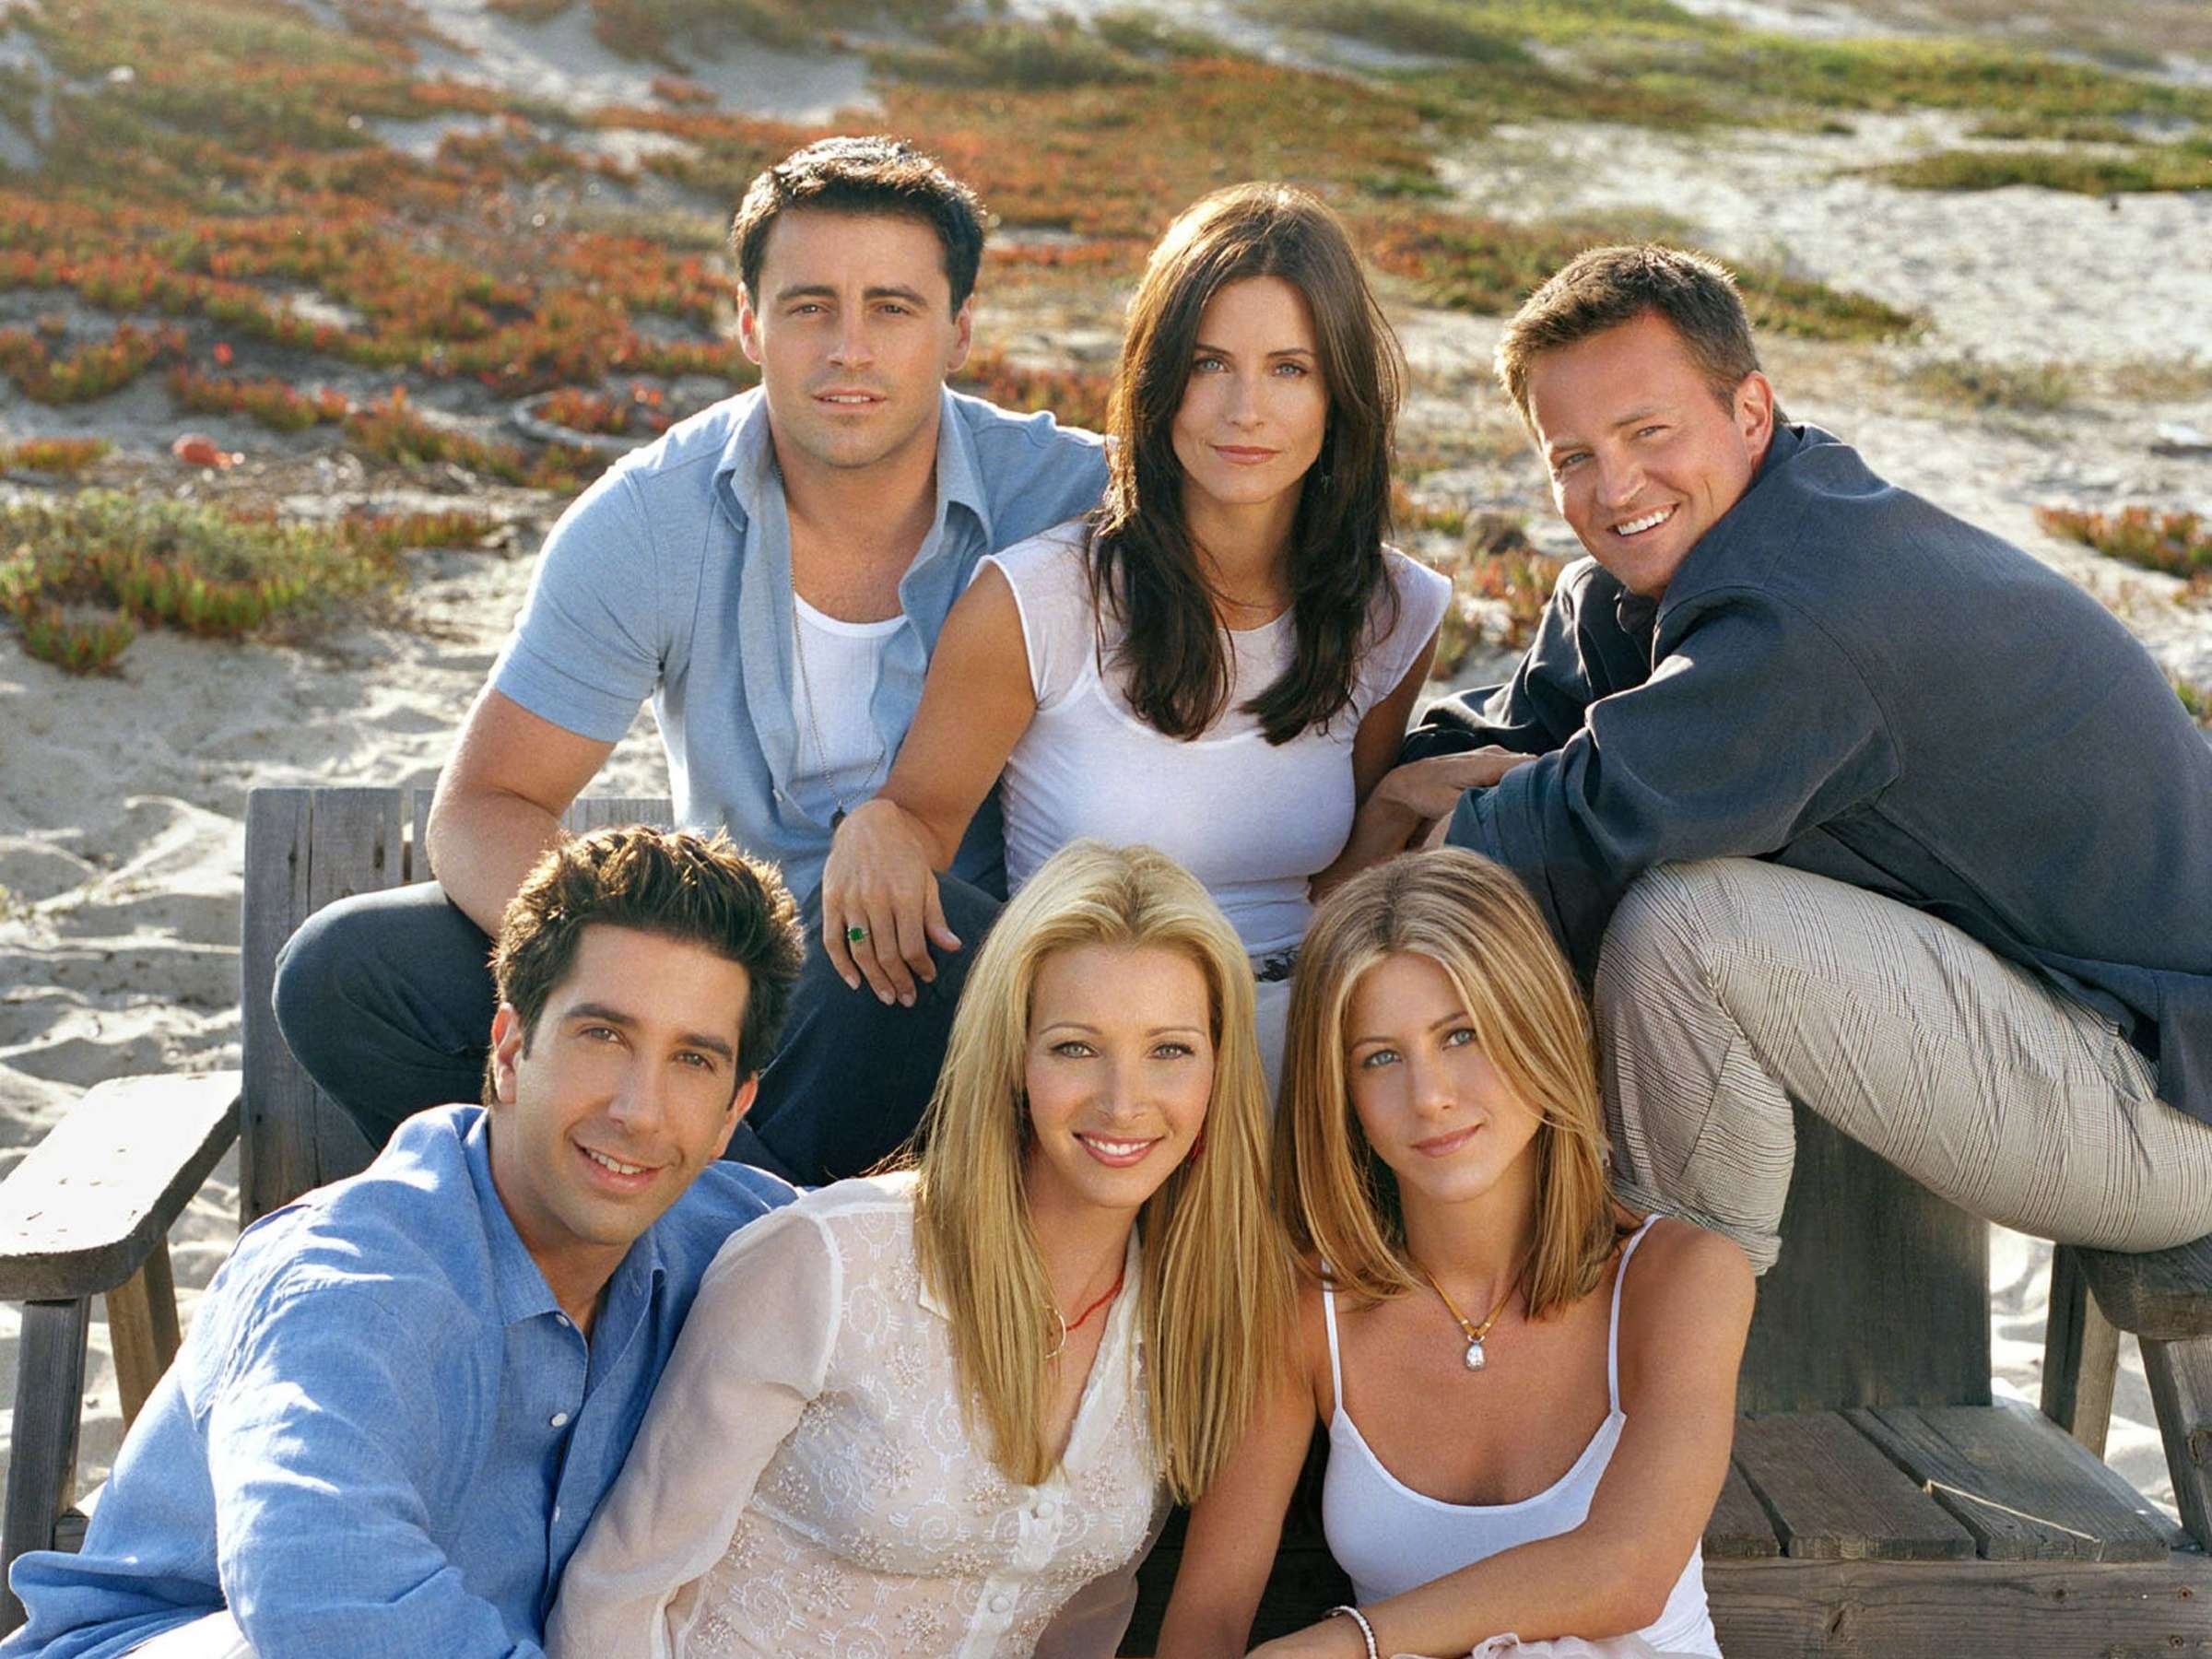 Friends reunion, Ross actor, Fans disappointed, Behind-the-scenes, 2400x1800 HD Desktop